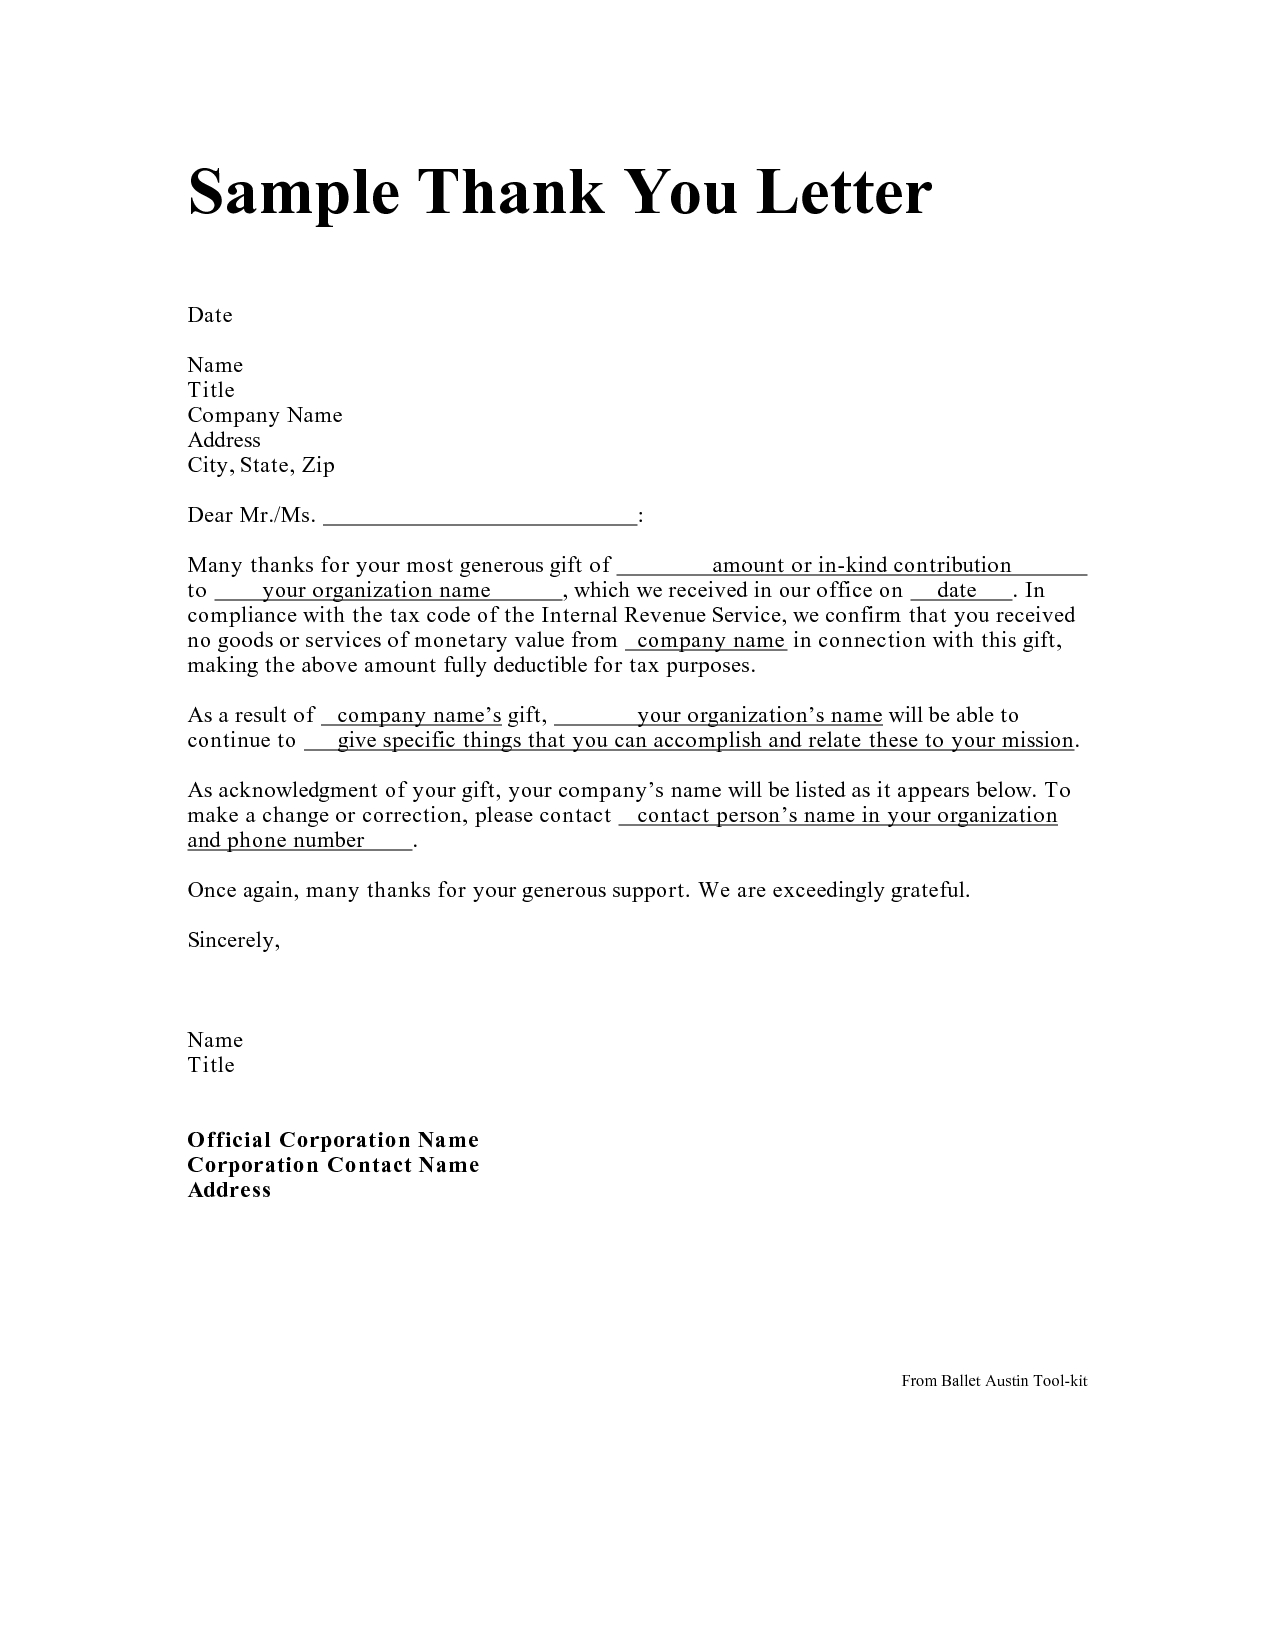 Grant Thank You Letter Template - Personal Thank You Letter Personal Thank You Letter Samples